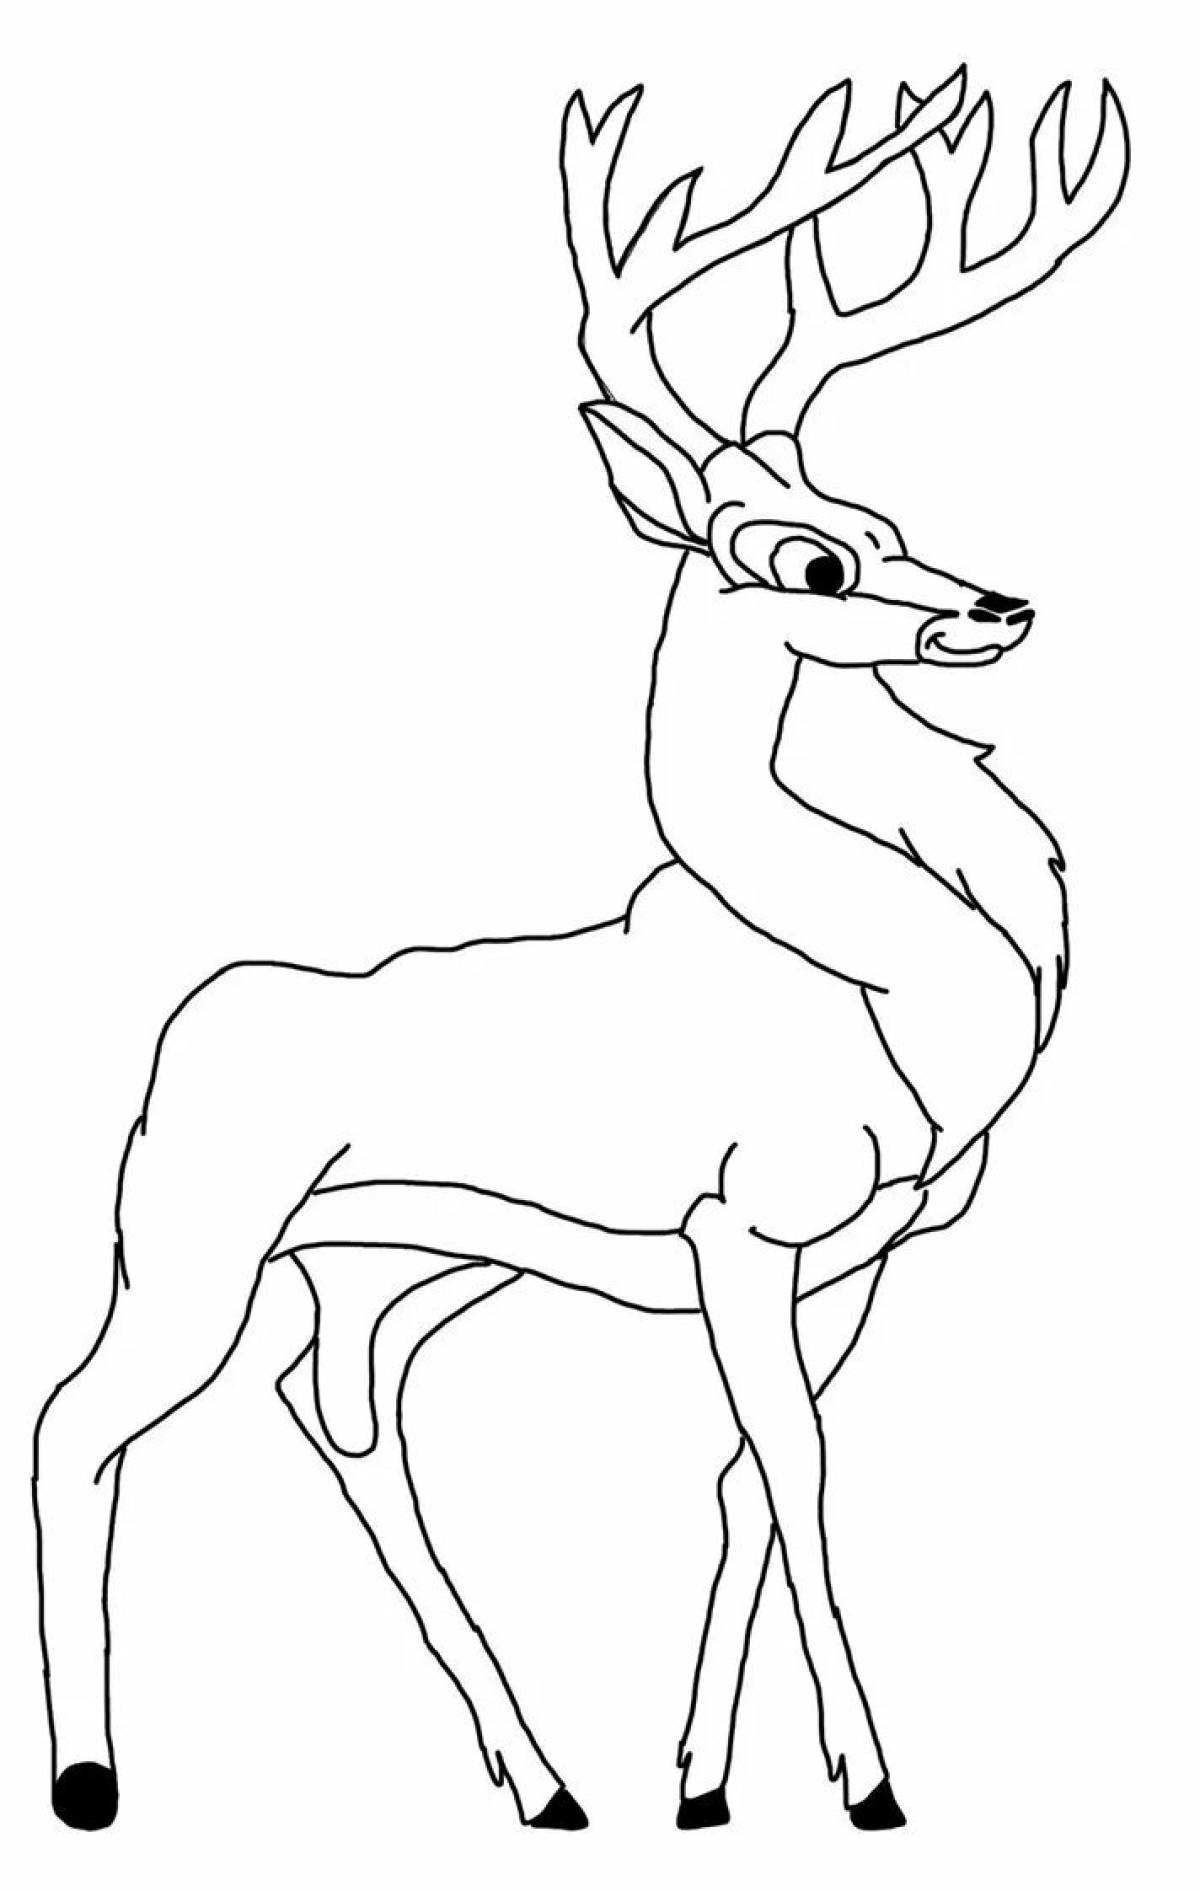 Colourful deer coloring book for children 6-7 years old